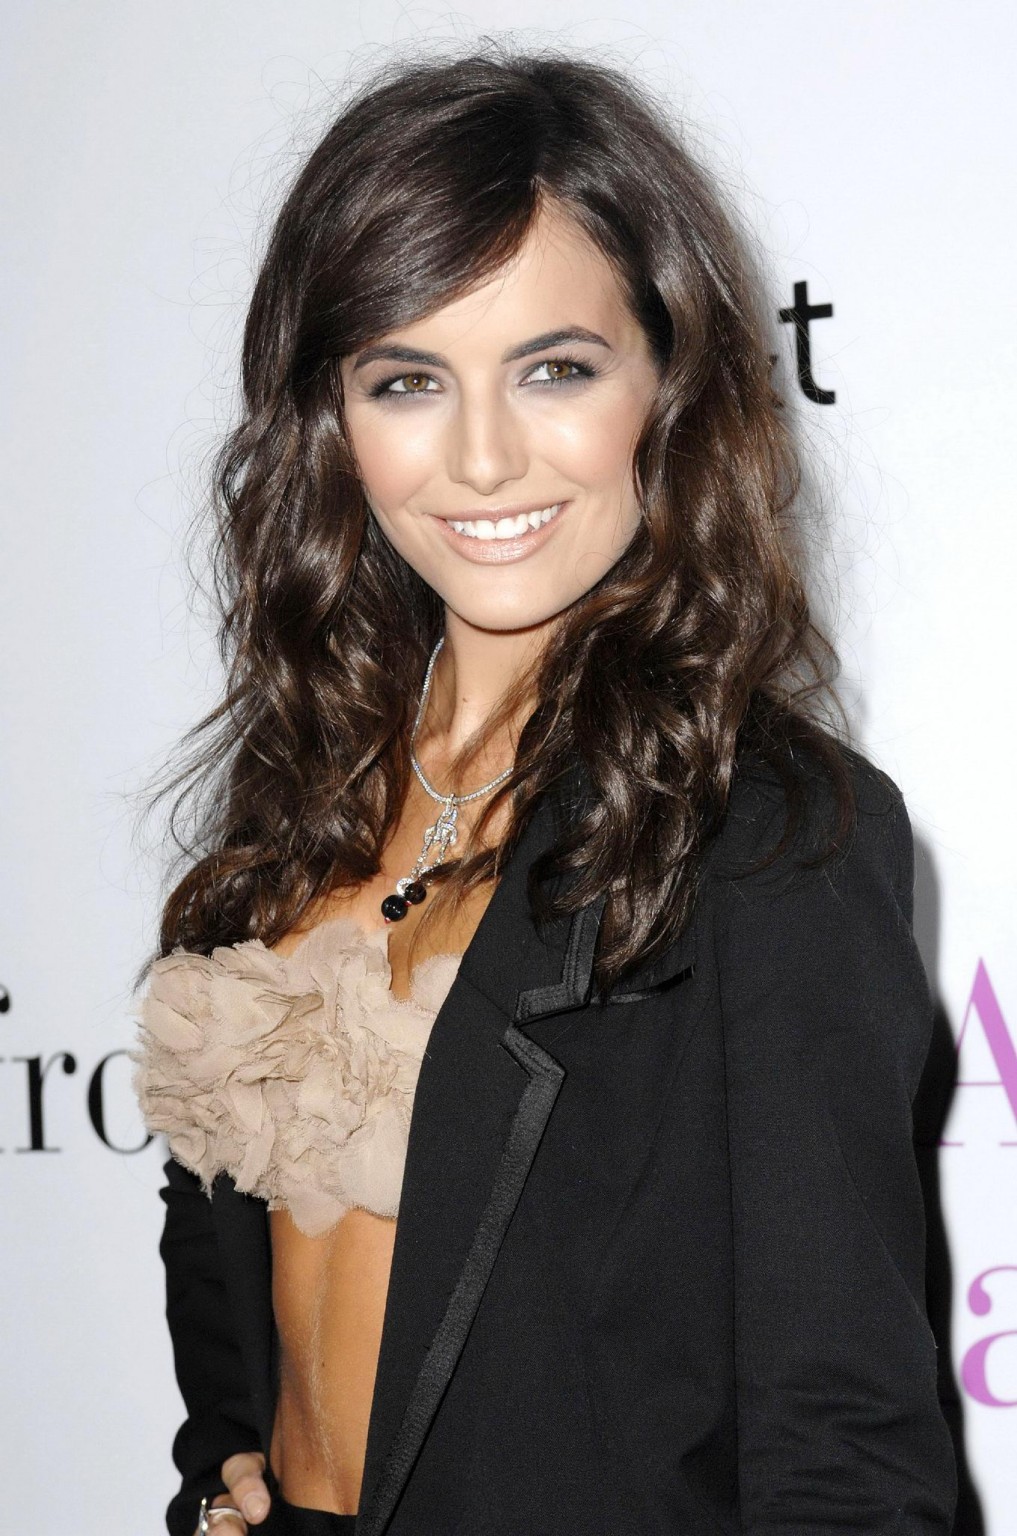 Camilla Belle showing her perfect abs at the Prada to Nada premiere in LA #75320223